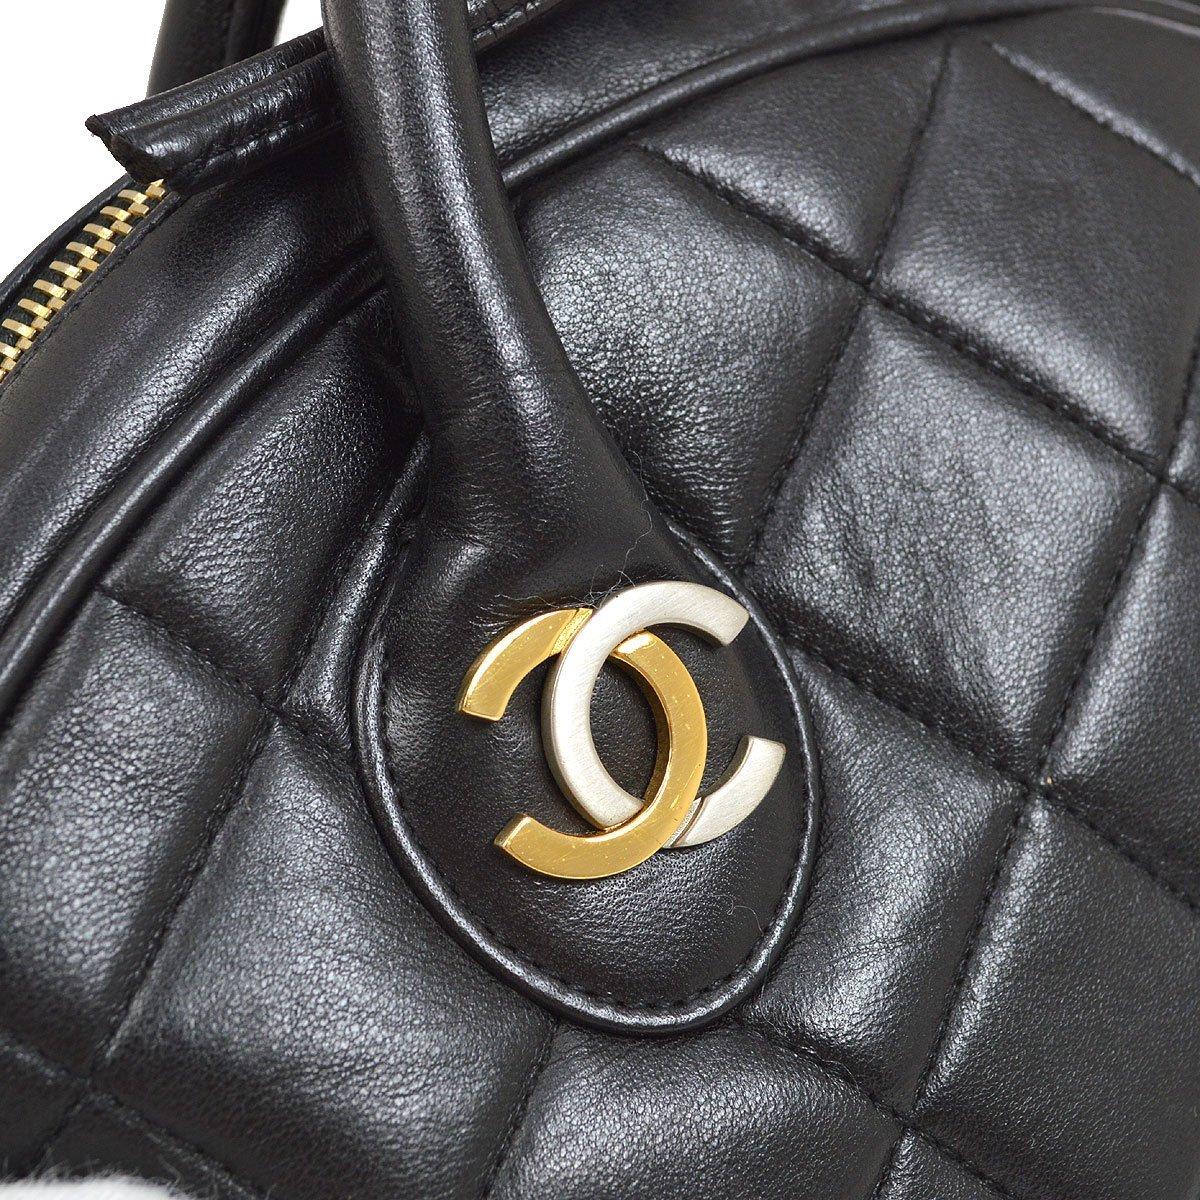 Pre-Owned Vintage Condition
From 1999 Collection
Lambskin Leather
Silver and Gold Tone Hardware
Leather Lining
Measures 8.75